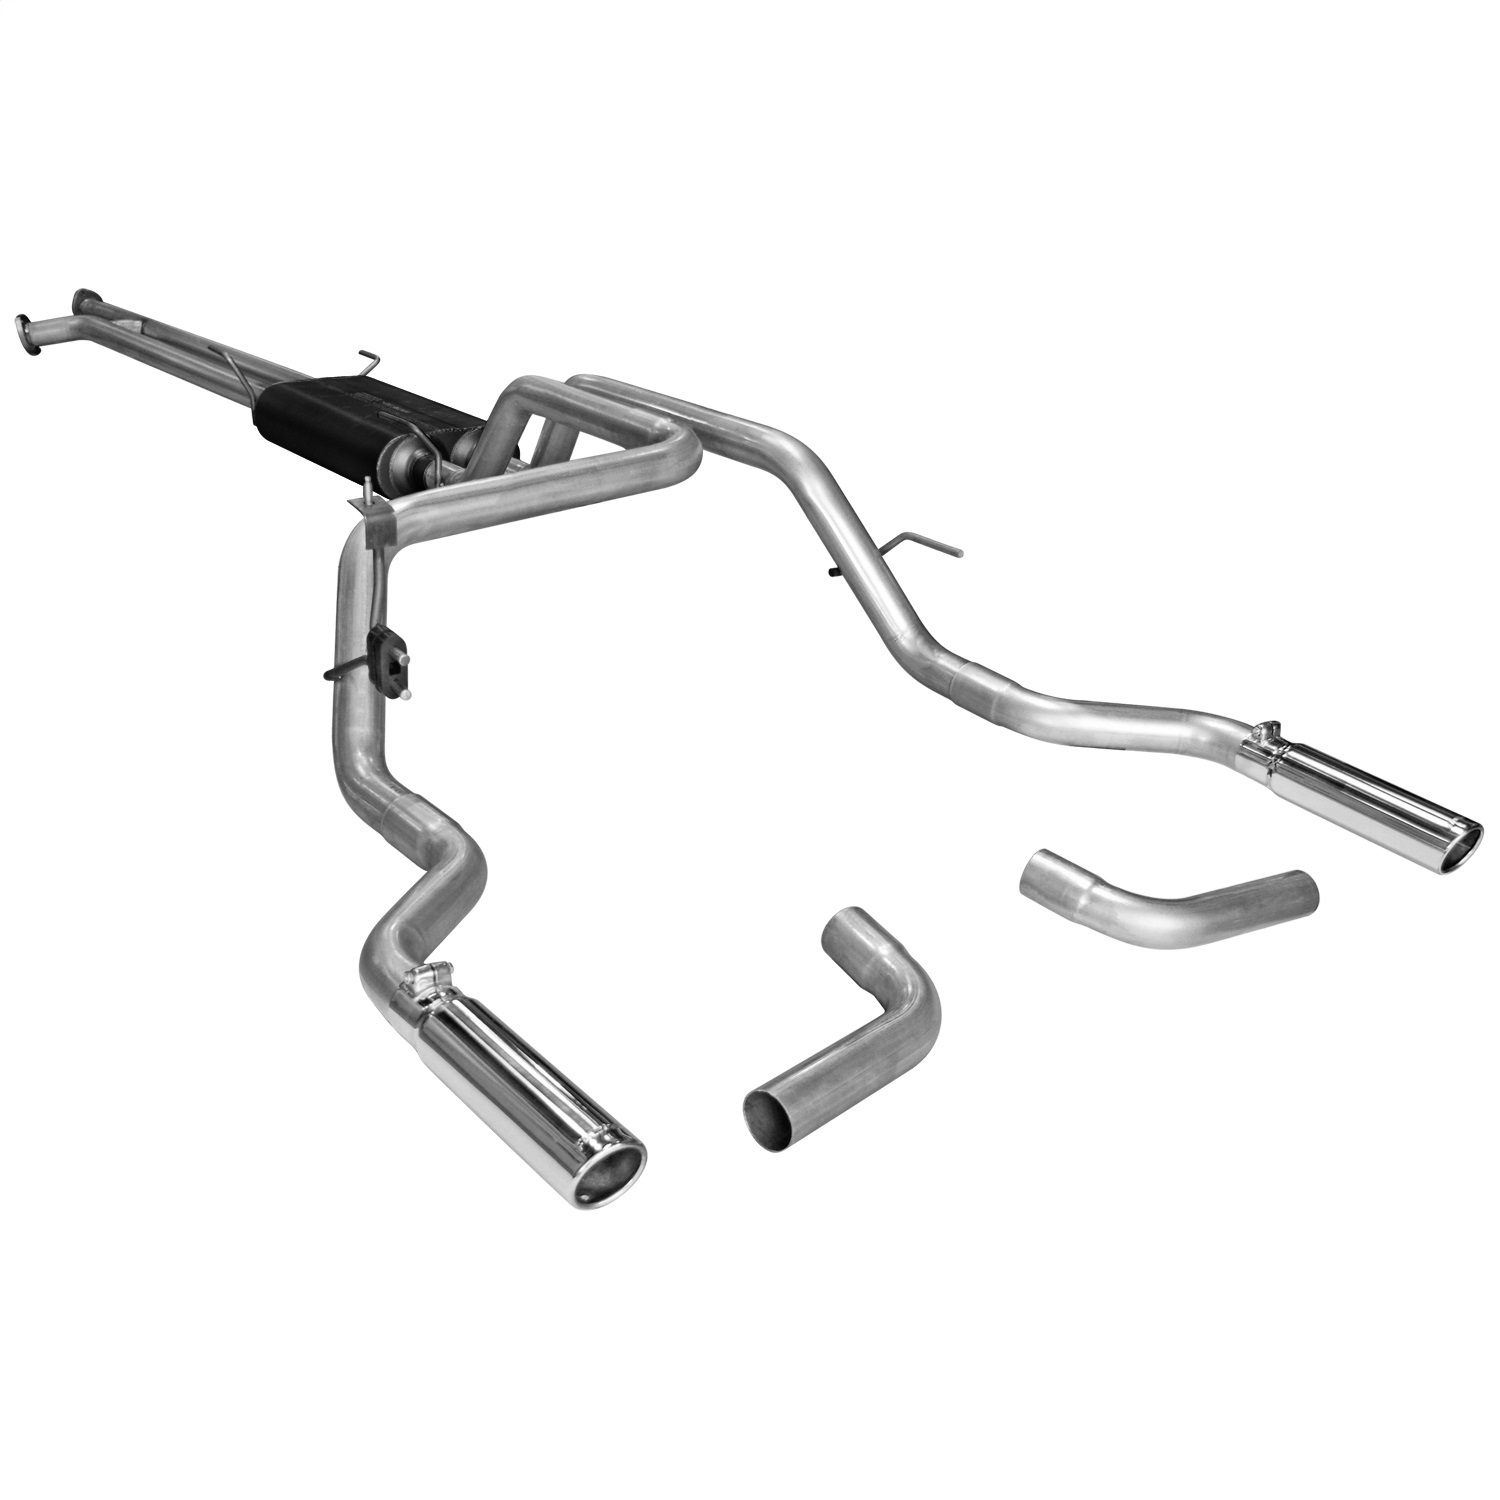 Flowmaster Flowmaster 17443 American Thunder Cat Back Exhaust System Fits 07-09 Tundra